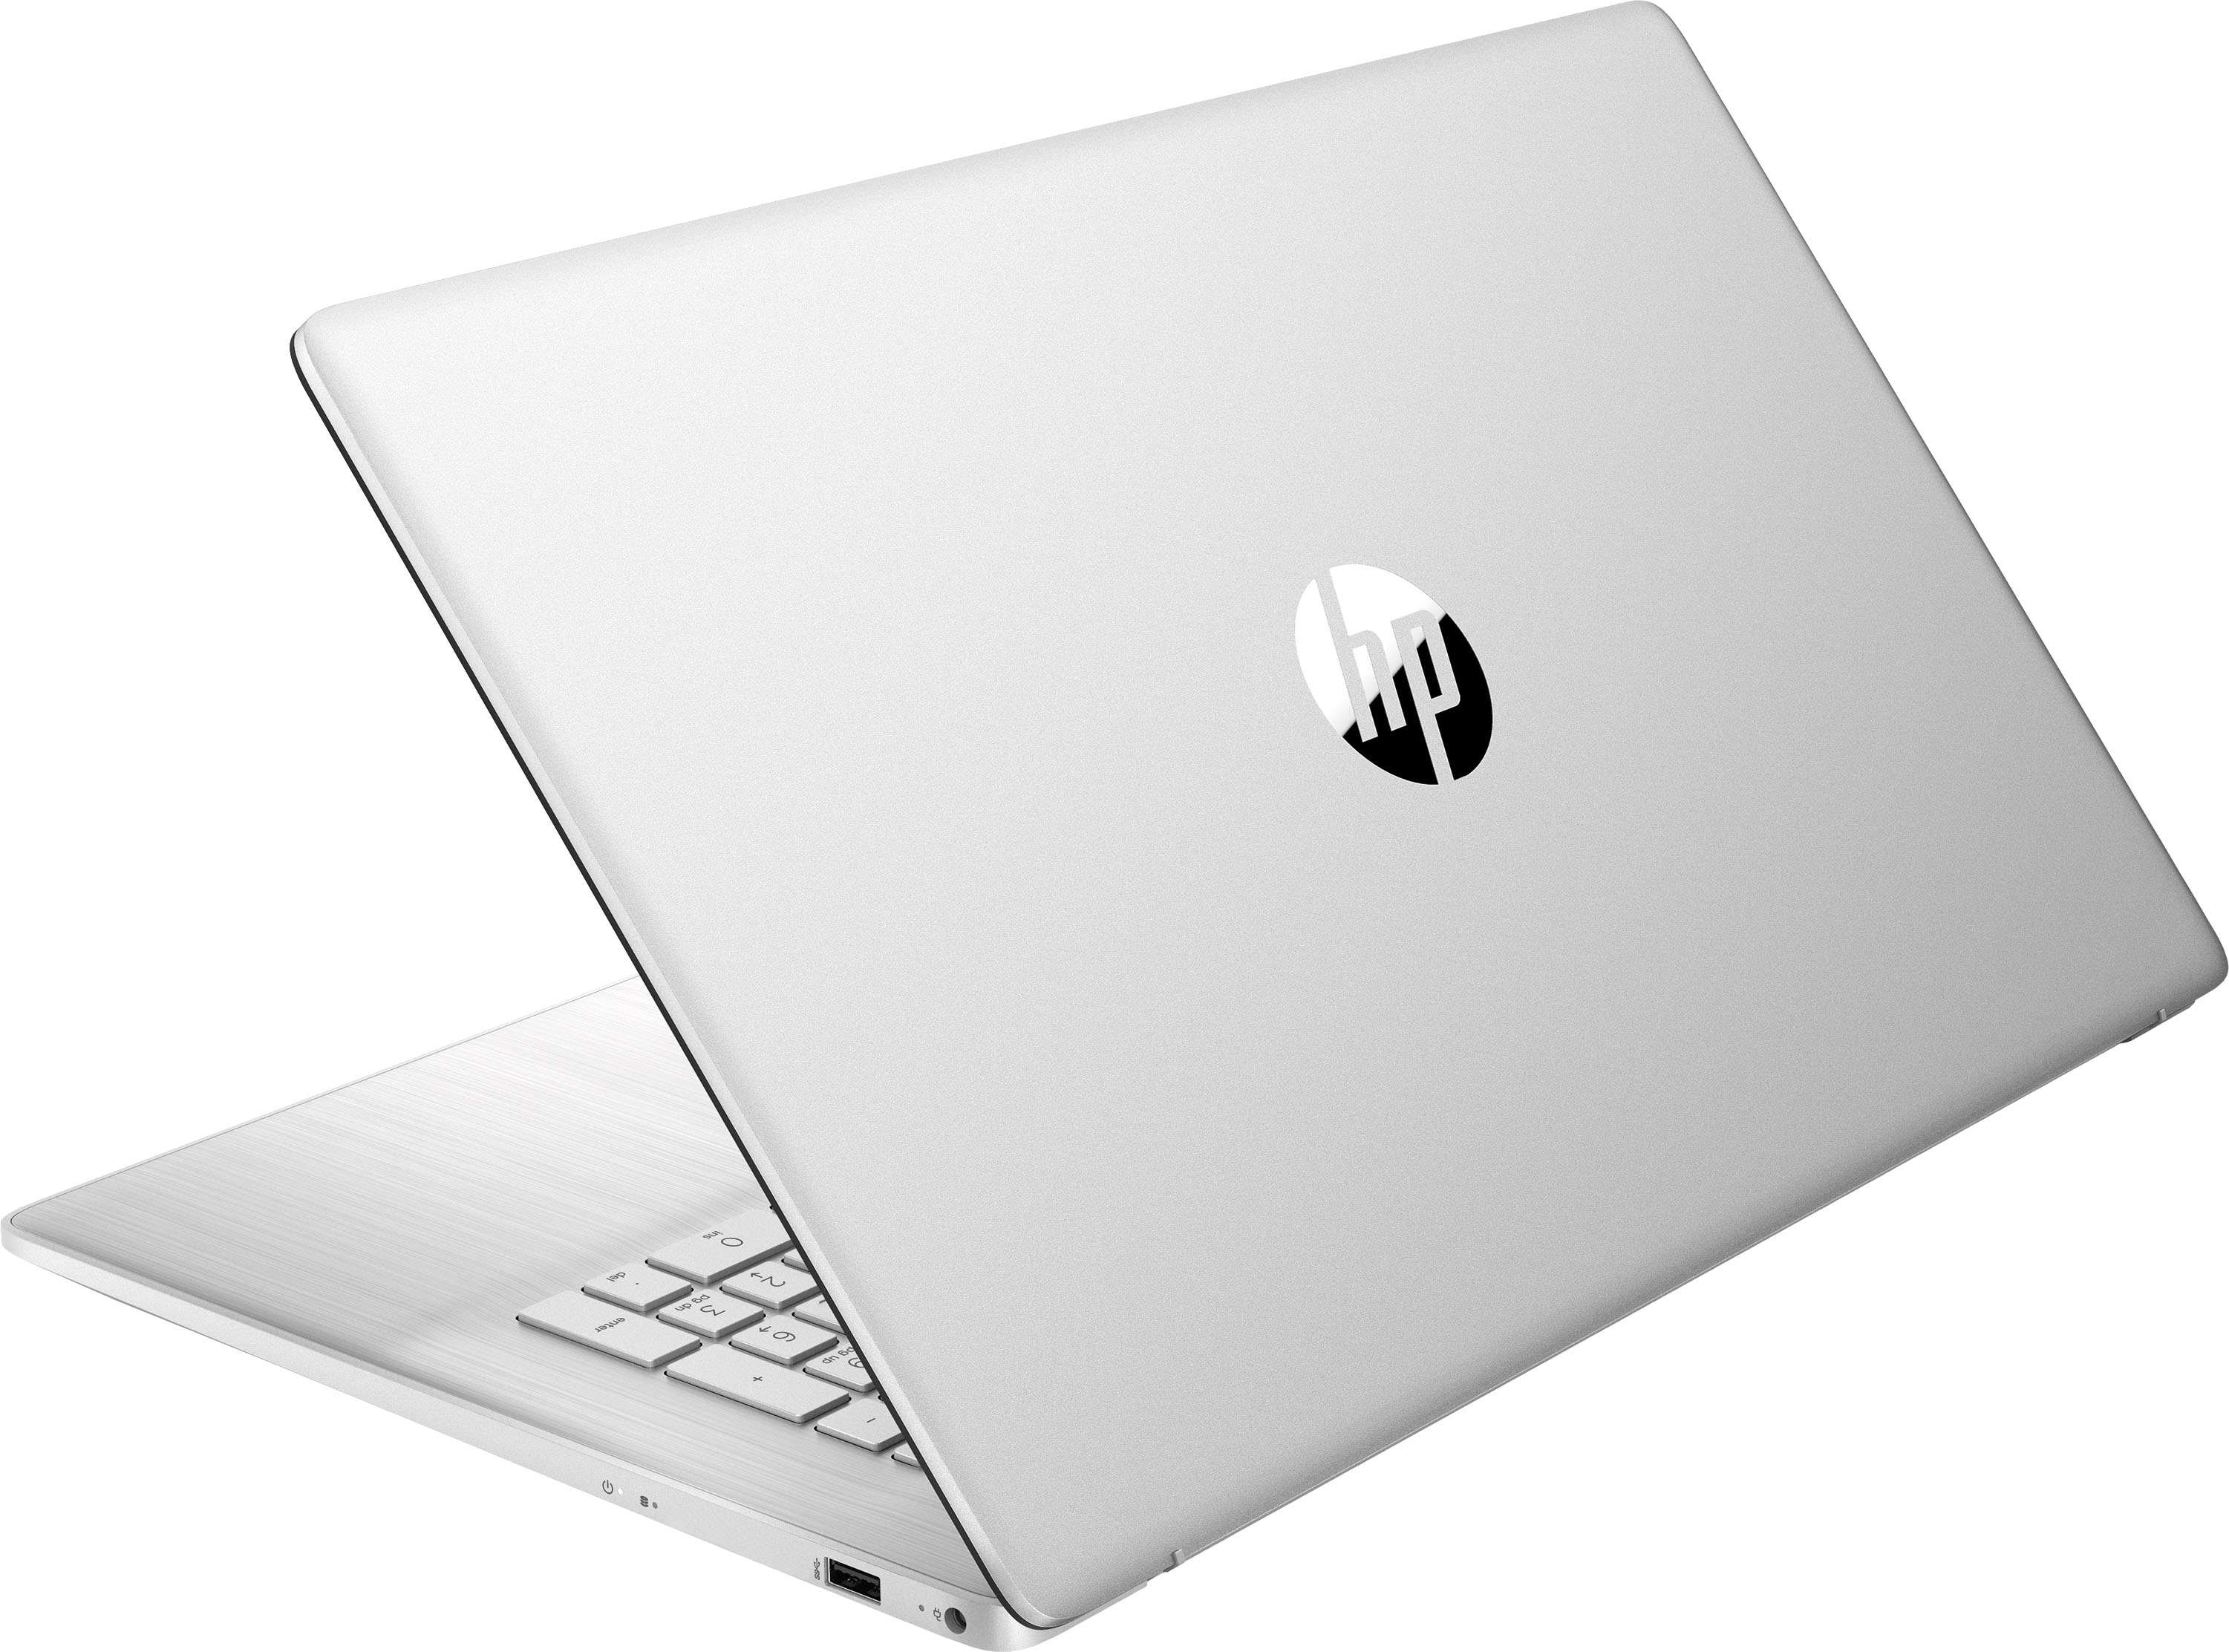 HP - 15.6" Touch-Screen - Laptop - Intel Core i5 - 12GB Memory - 256GB SSD - Natural Silver